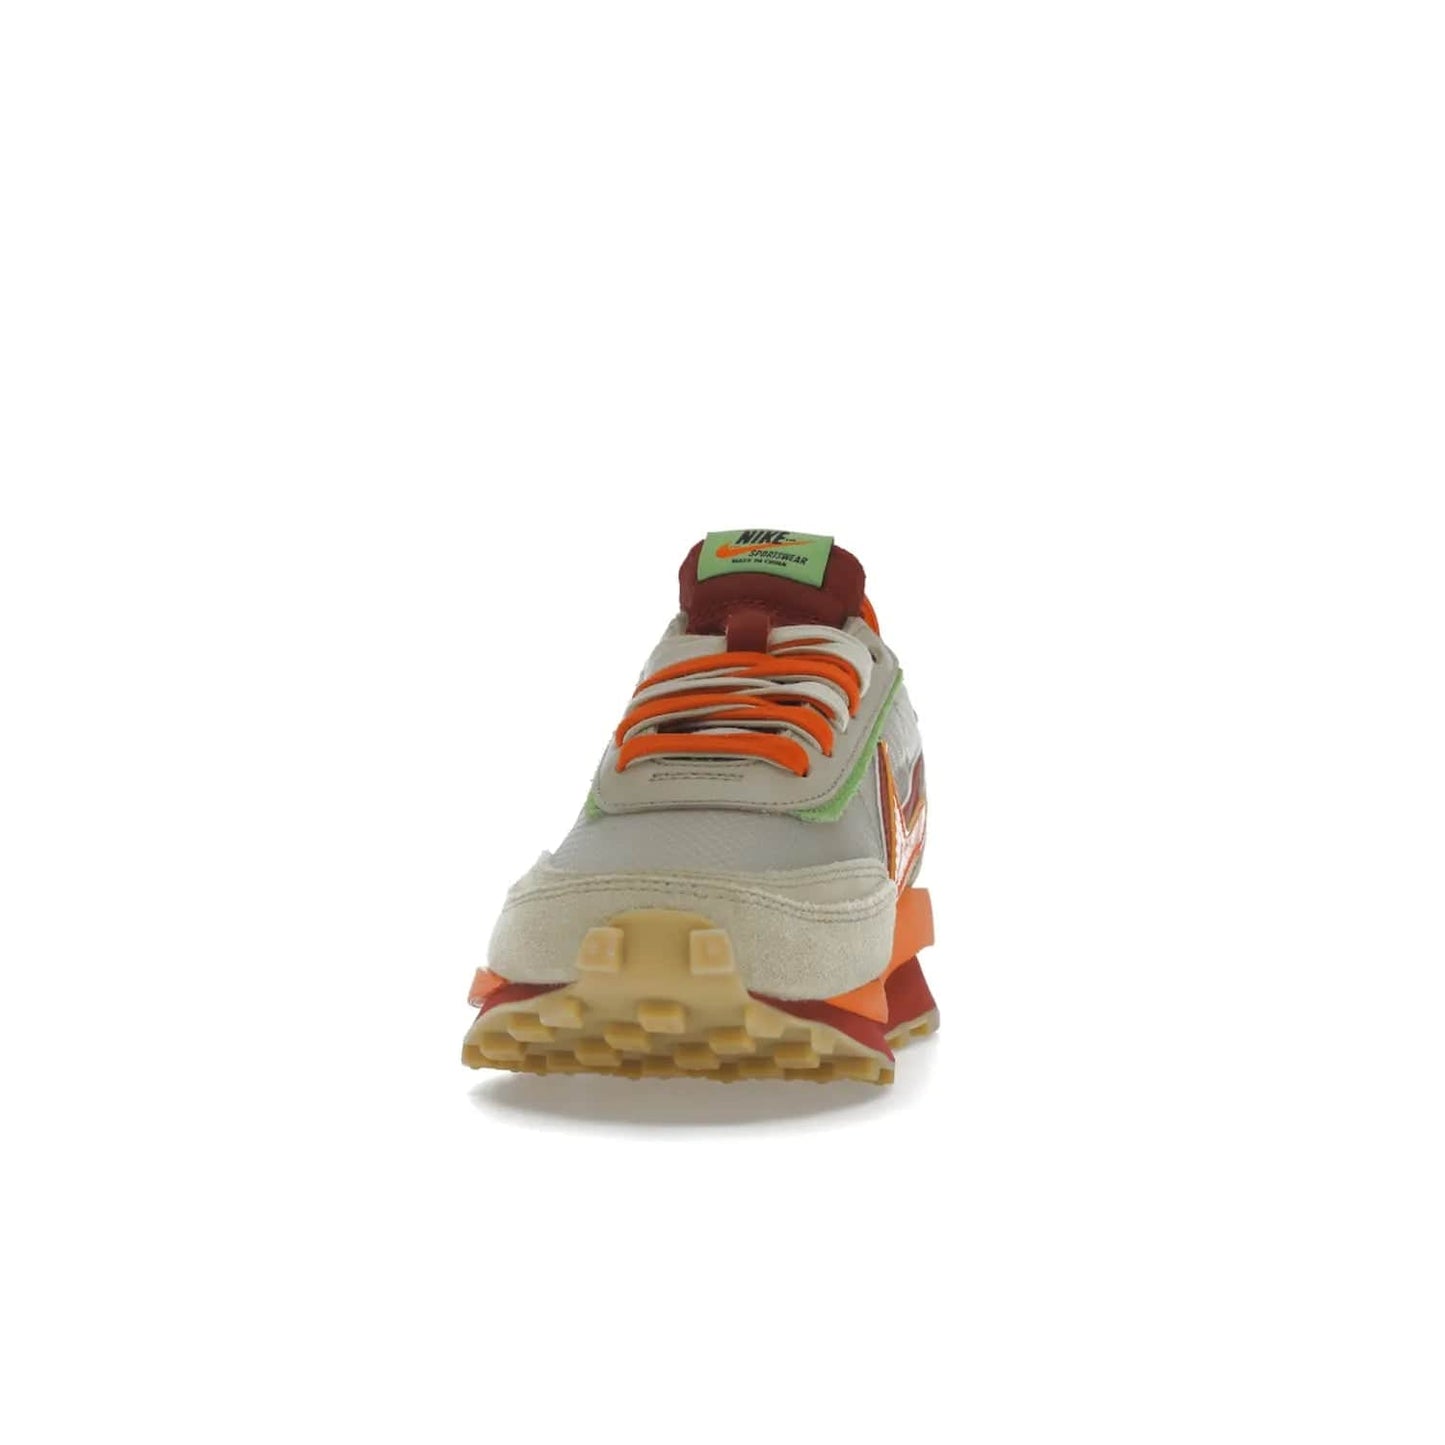 Nike LD Waffle sacai CLOT Kiss of Death Net Orange Blaze - Image 11 - Only at www.BallersClubKickz.com - A bold and stylish Nike LD Waffle sacai CLOT Kiss of Death Net Orange Blaze sneaker featuring a unique off-white, Deep Red & Orange Blaze Swooshes, two-toned stacked sole and doubled tongue. Available in September 2021. Make a statement.